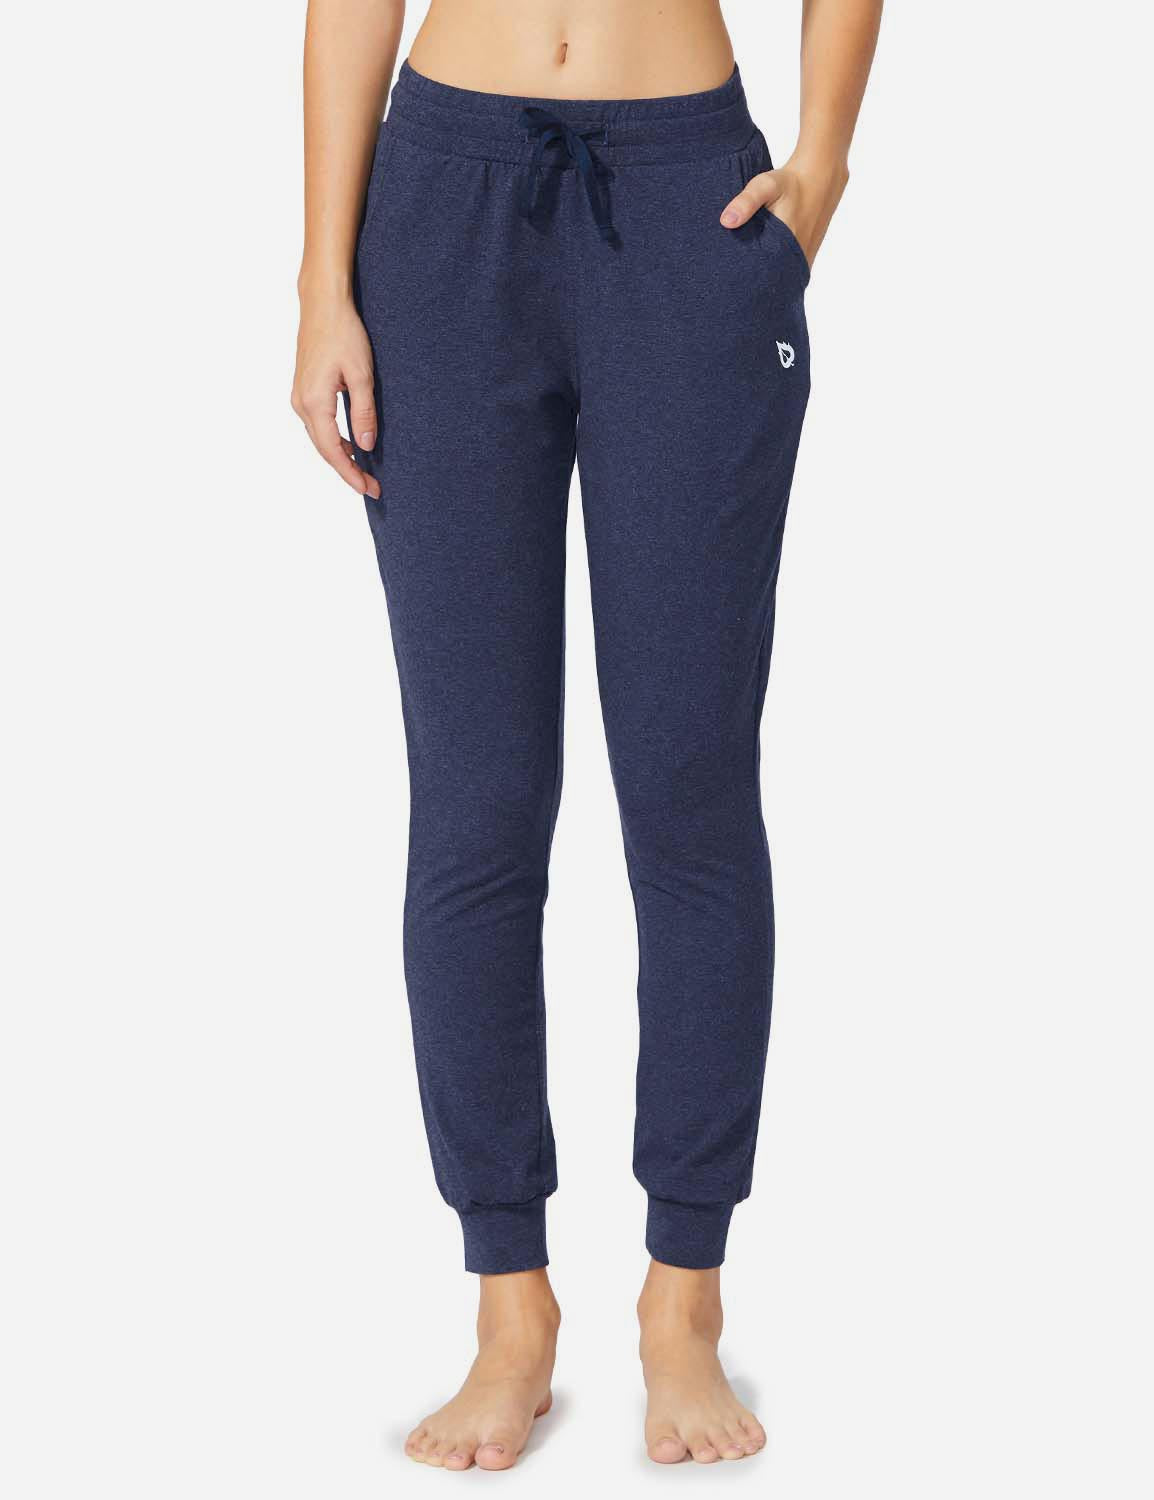 Baleaf Women's Cotton Comfy Pocketed & Tapered Weekend Joggers abh103 Navy Heather Front